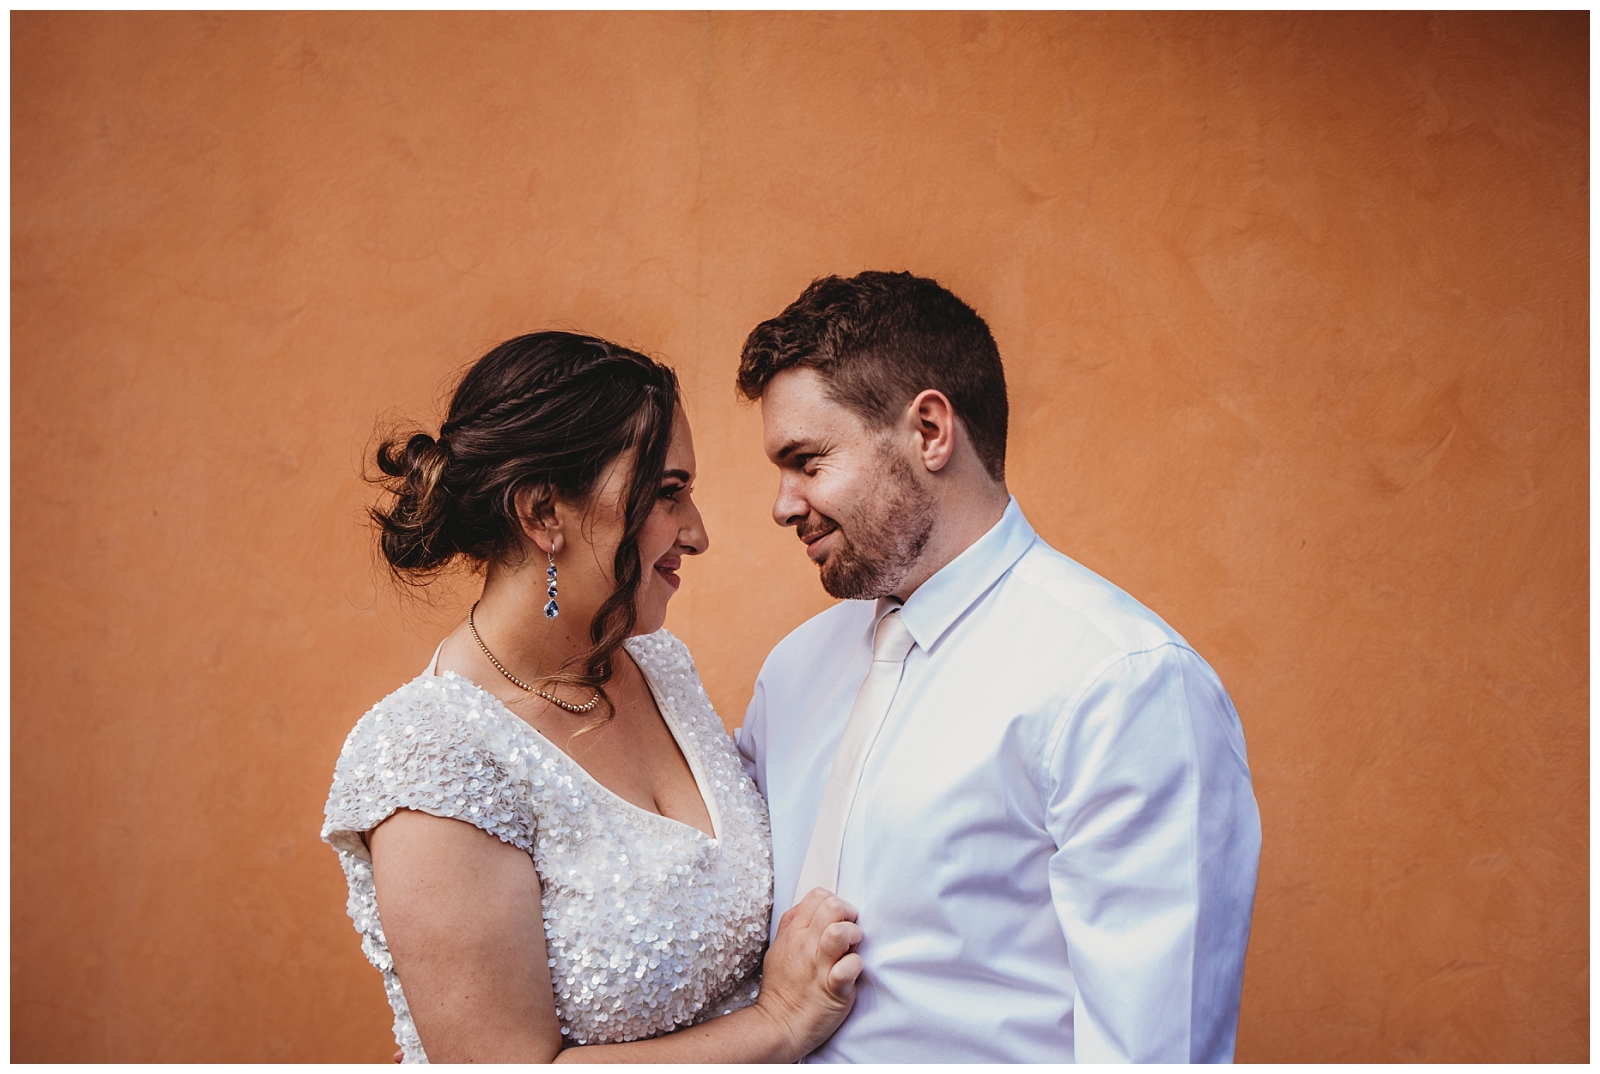 Brid and Groom pulled close together facing each other  in front of orange wall.